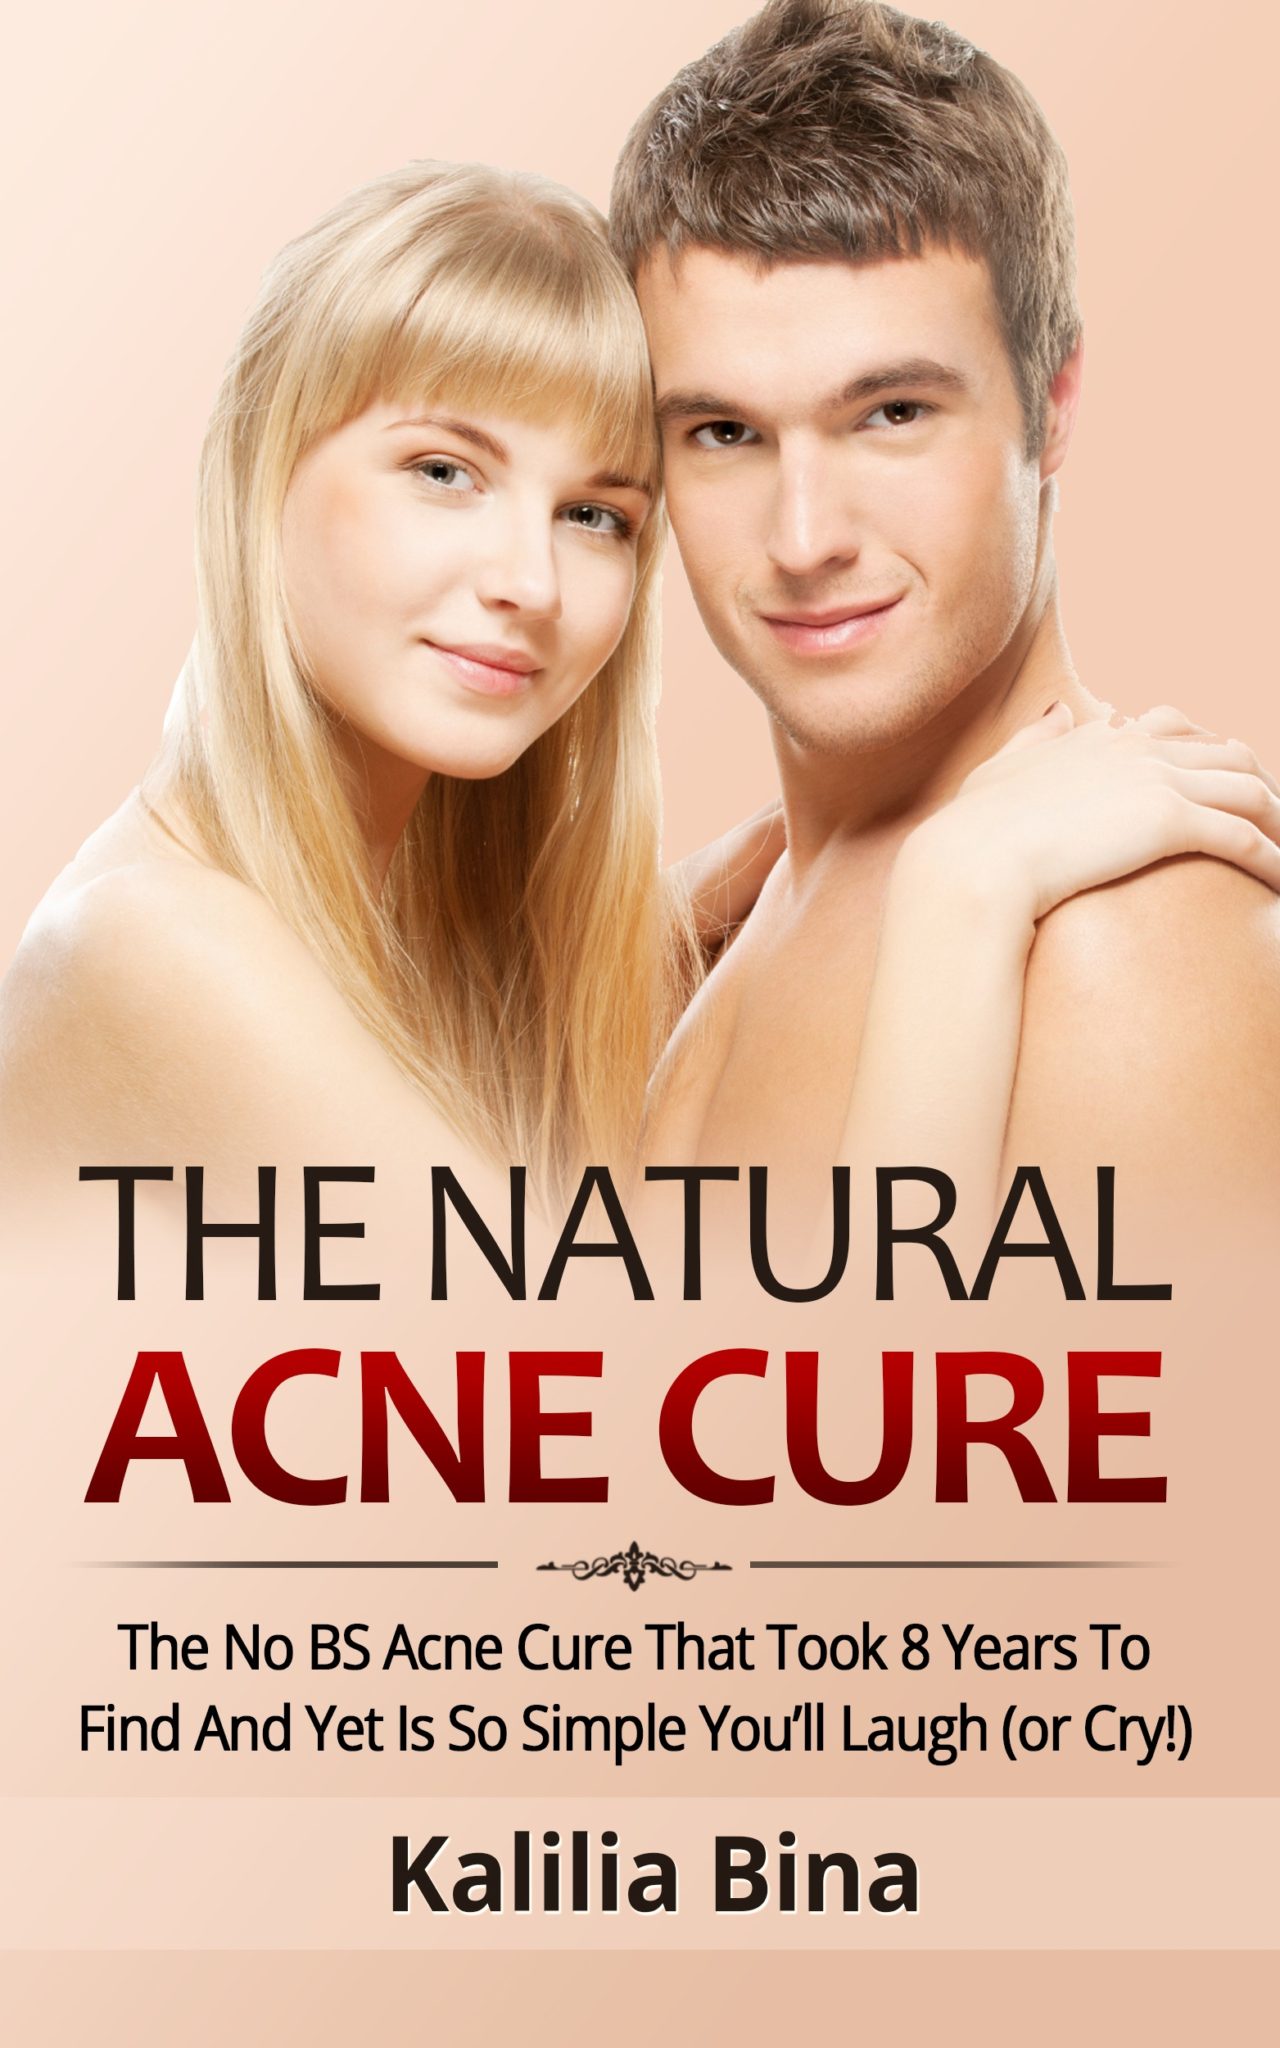 Natural Acne Cure: The No-BS Natural Cure for Acne That Took Decades to Find and Yet So Simple You’ll Laugh (Or Cry!) (acne treatment, zit treatment, pimple treatment, remove blackheads Book 1) by Kalilia Bina